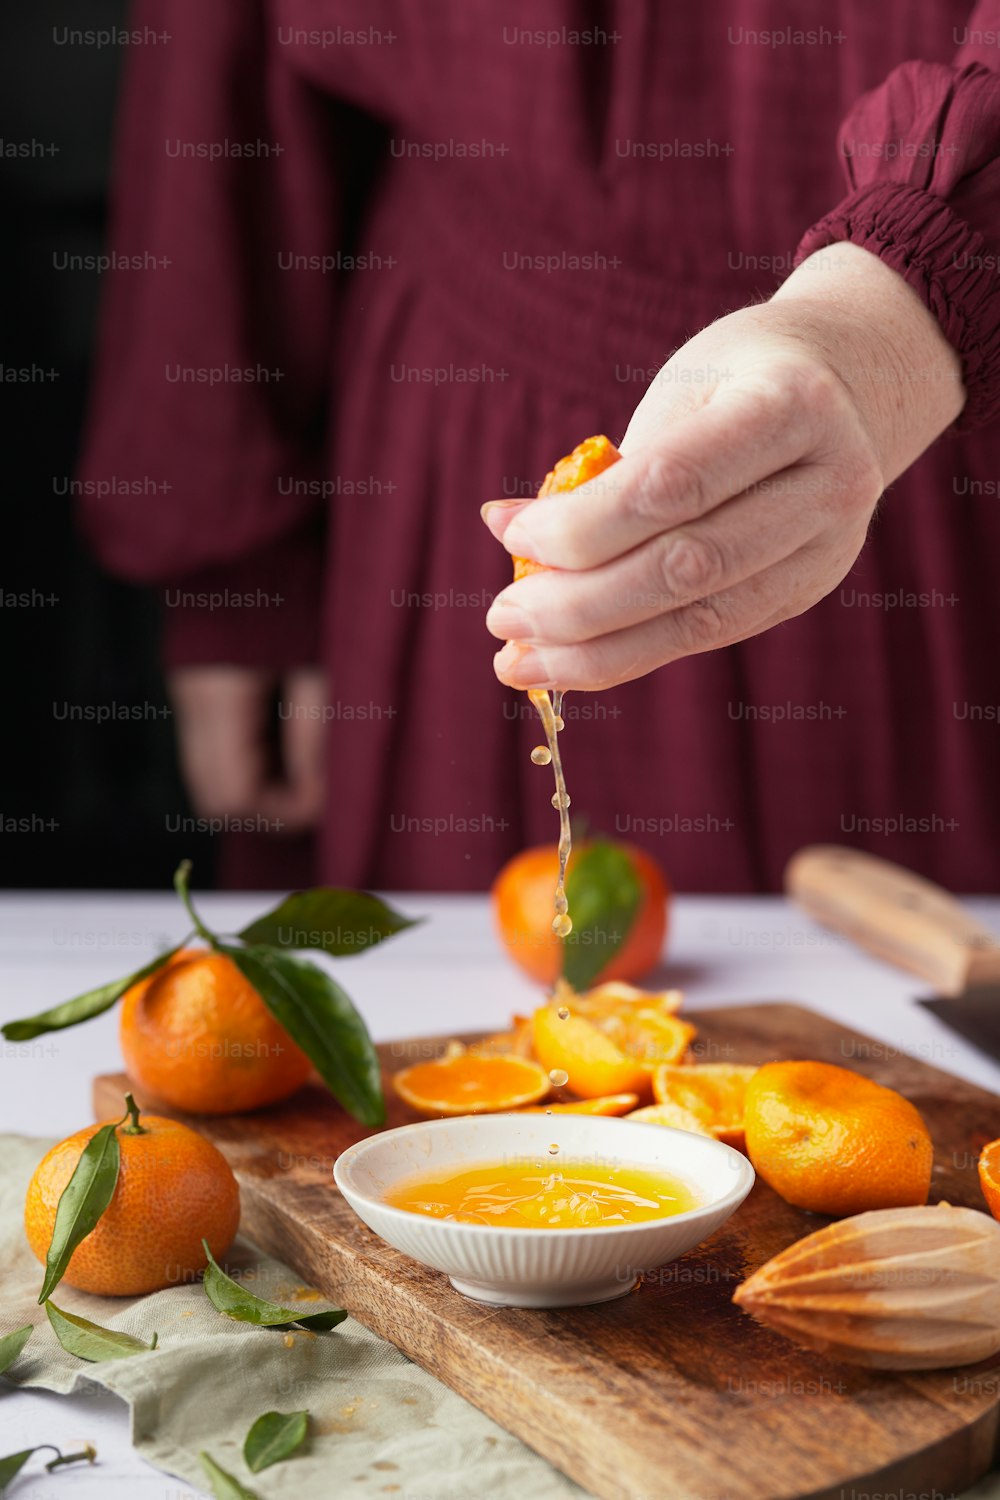 a person pouring a liquid into a bowl of oranges